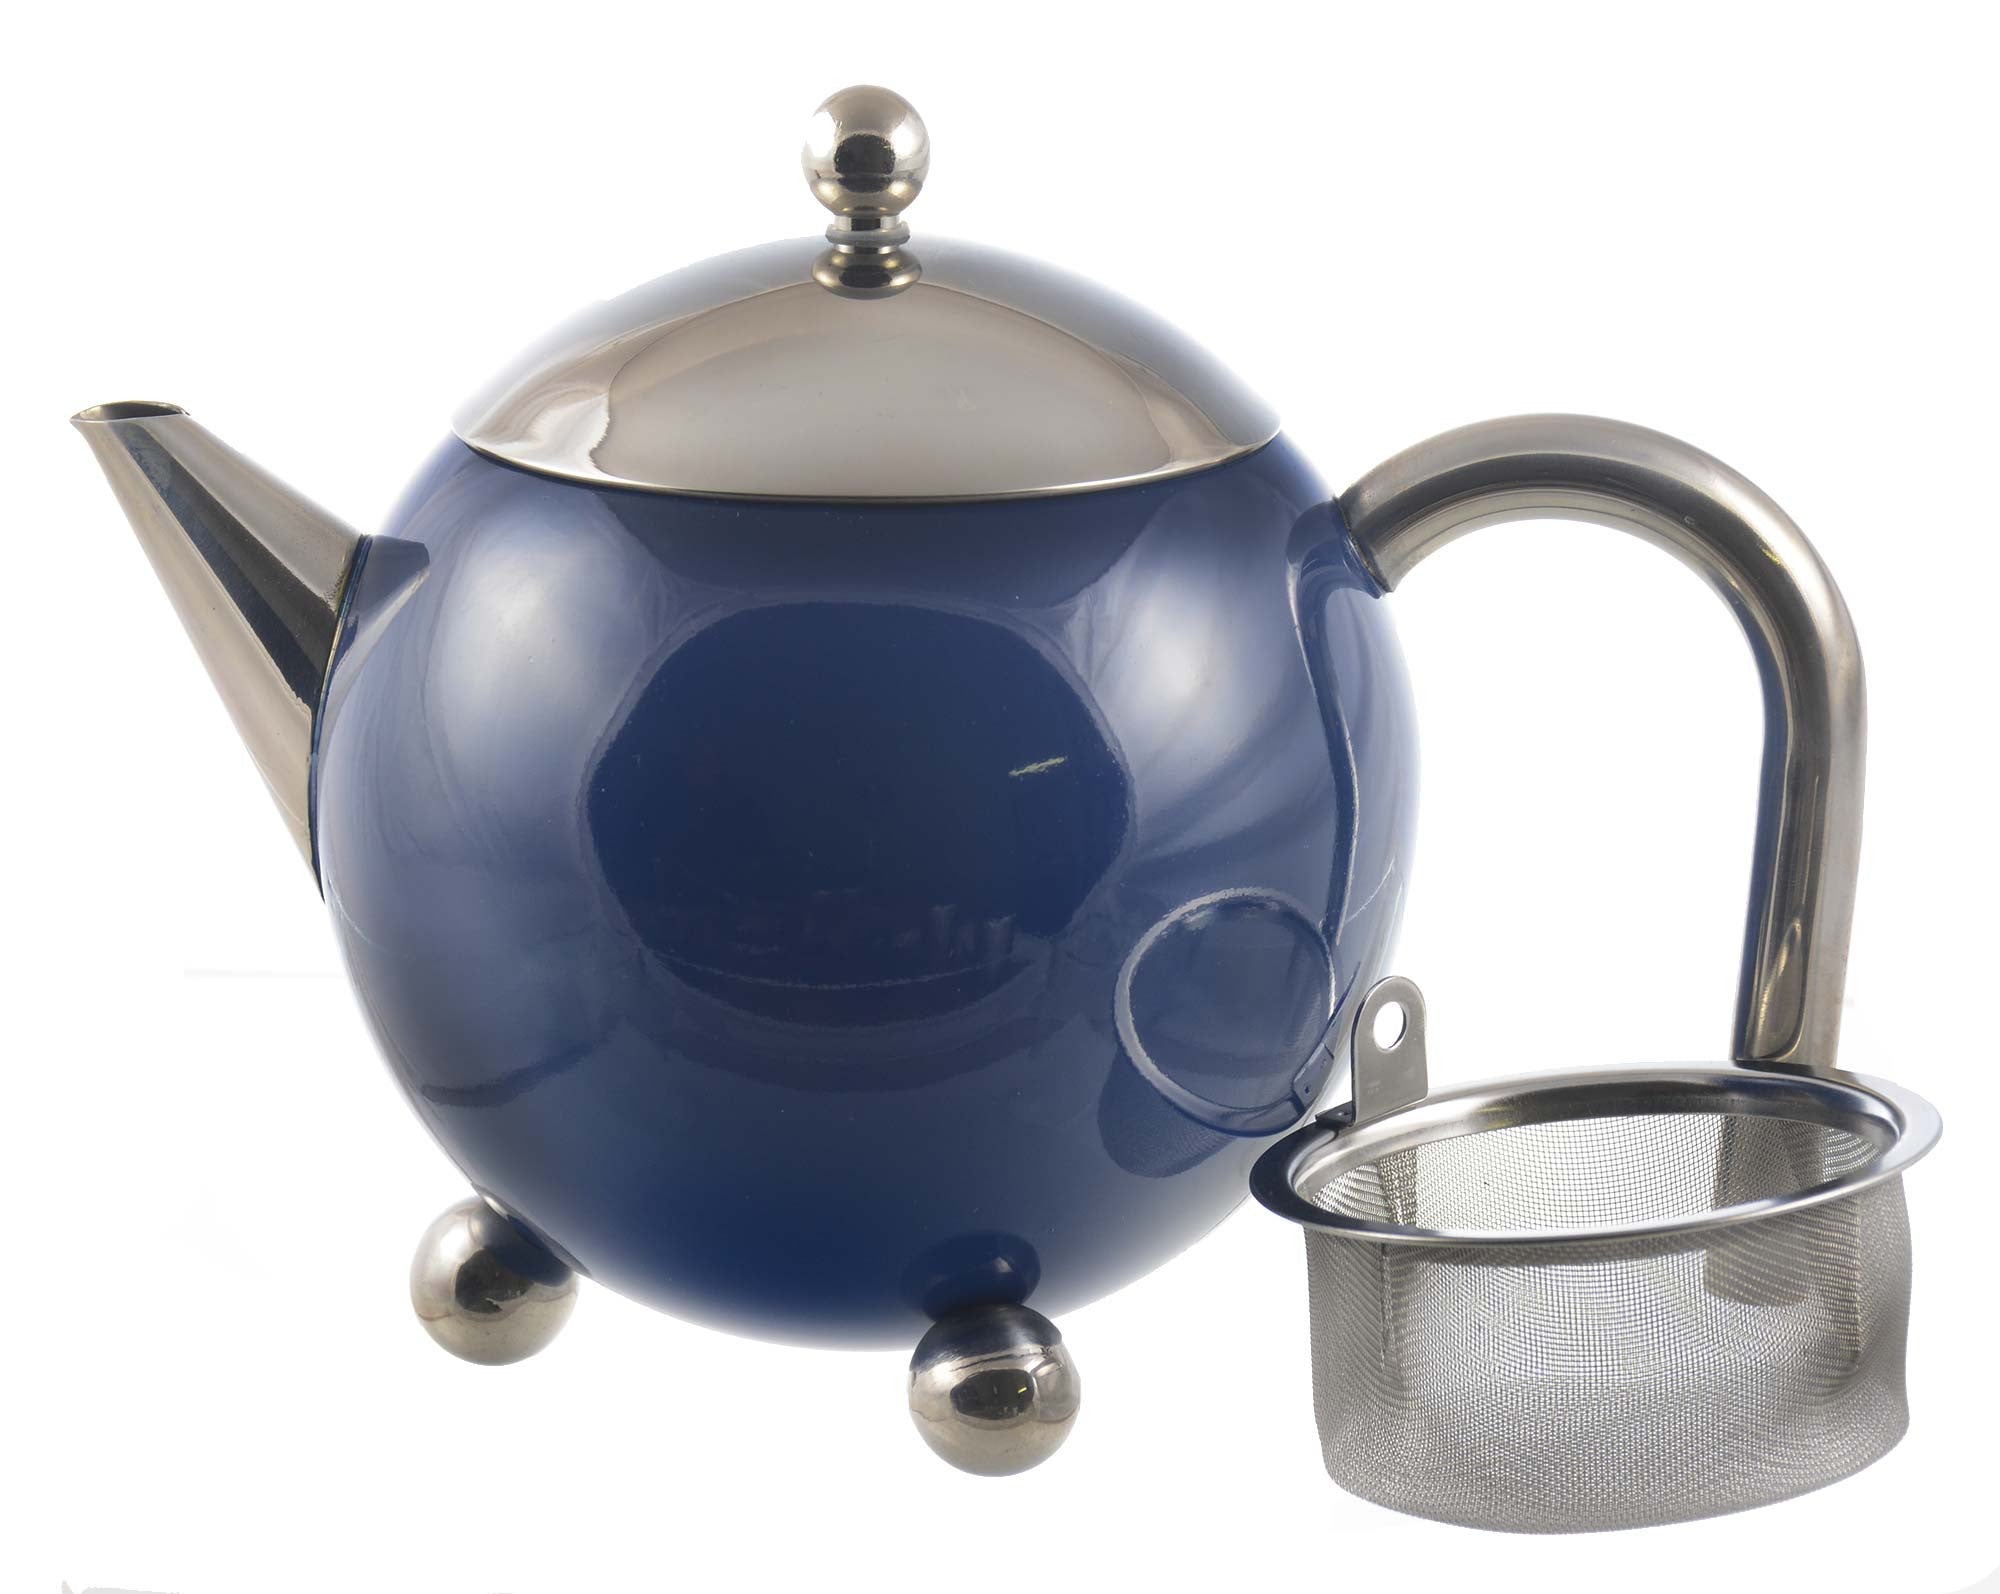 Stainless Steel Teapot With Infuser